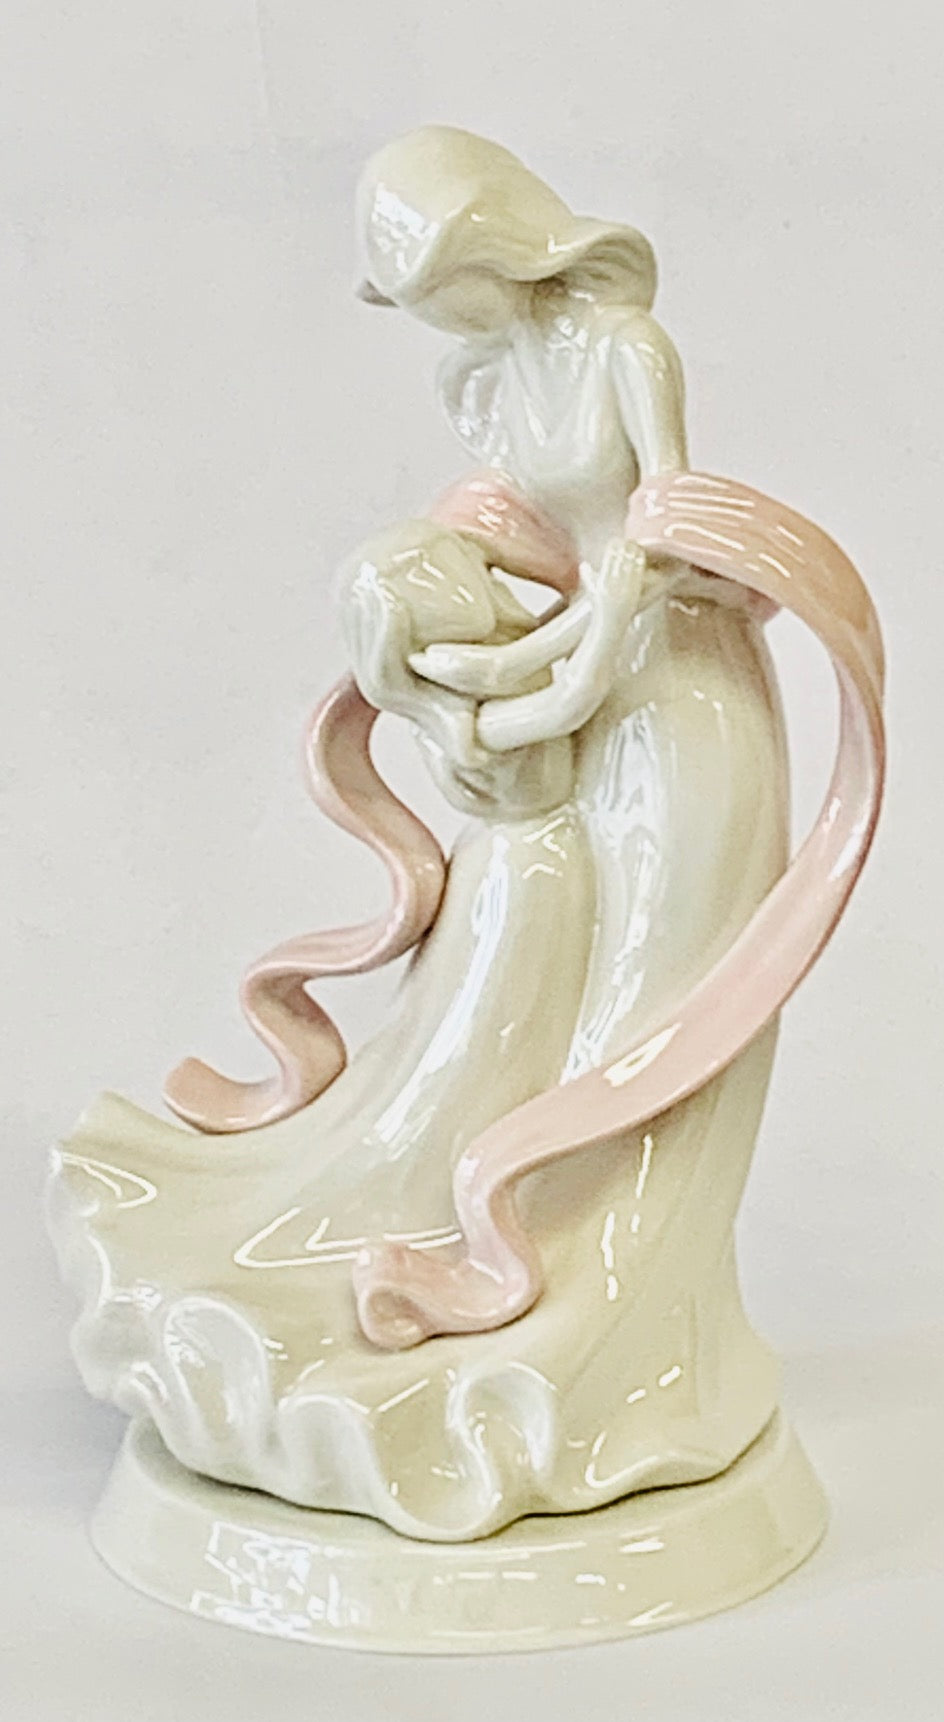 Mother & Daughter (Generations of Love) Porcelain Statue 4.5"wide X 4"deep X 8"tall - Royal Gift